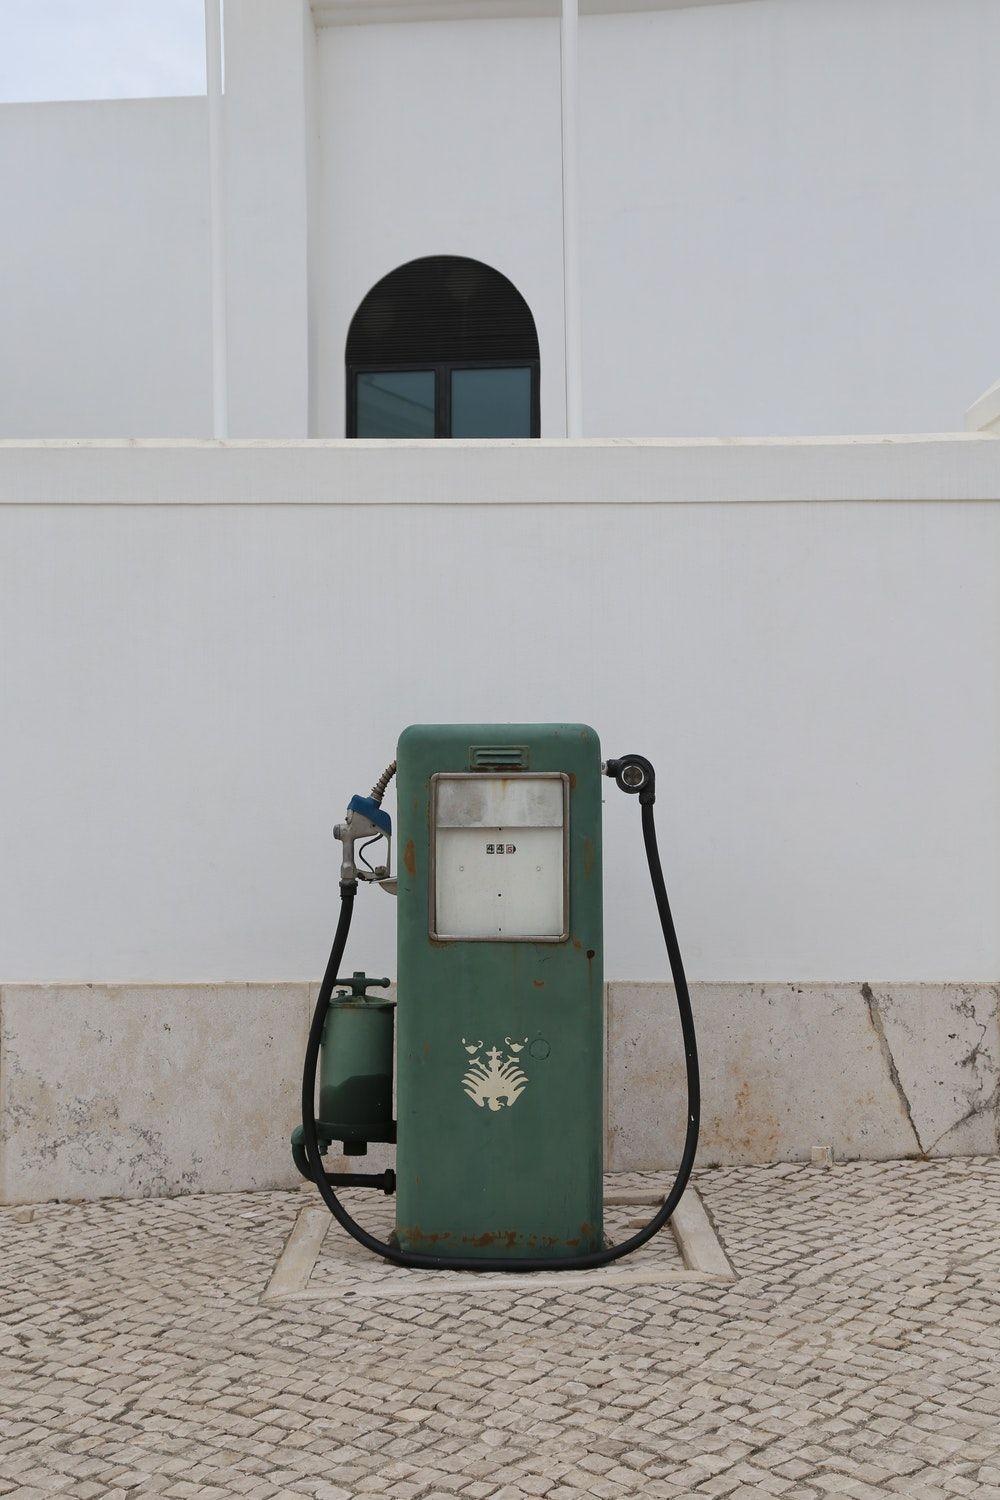 Fuel Pump Picture. Download Free Image